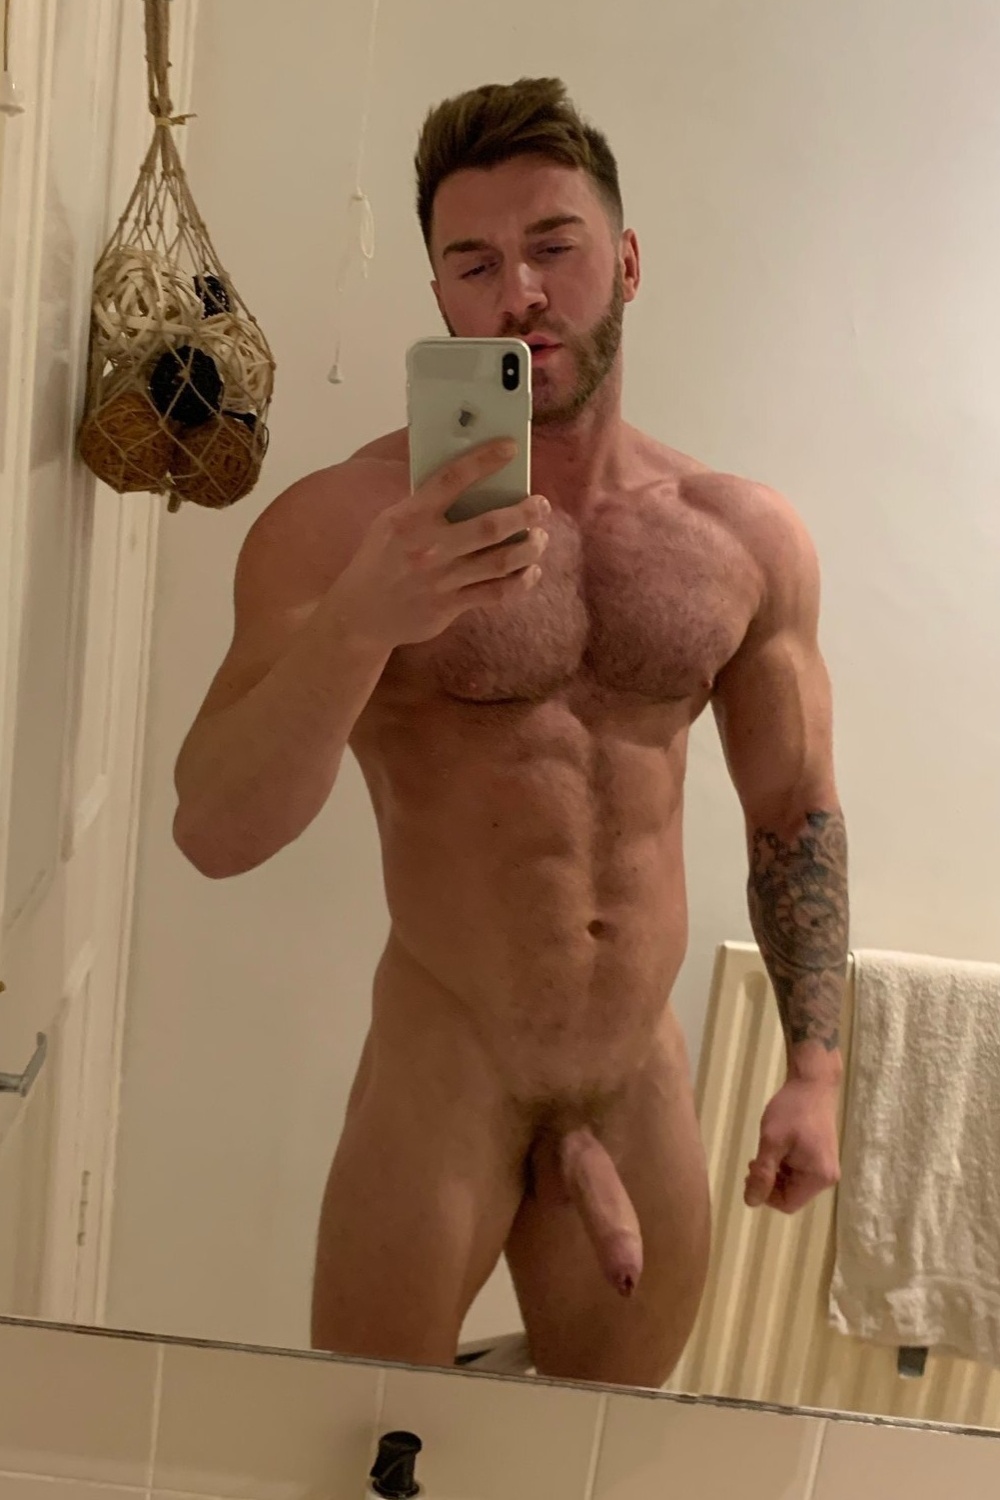 Philip solo onlyfans